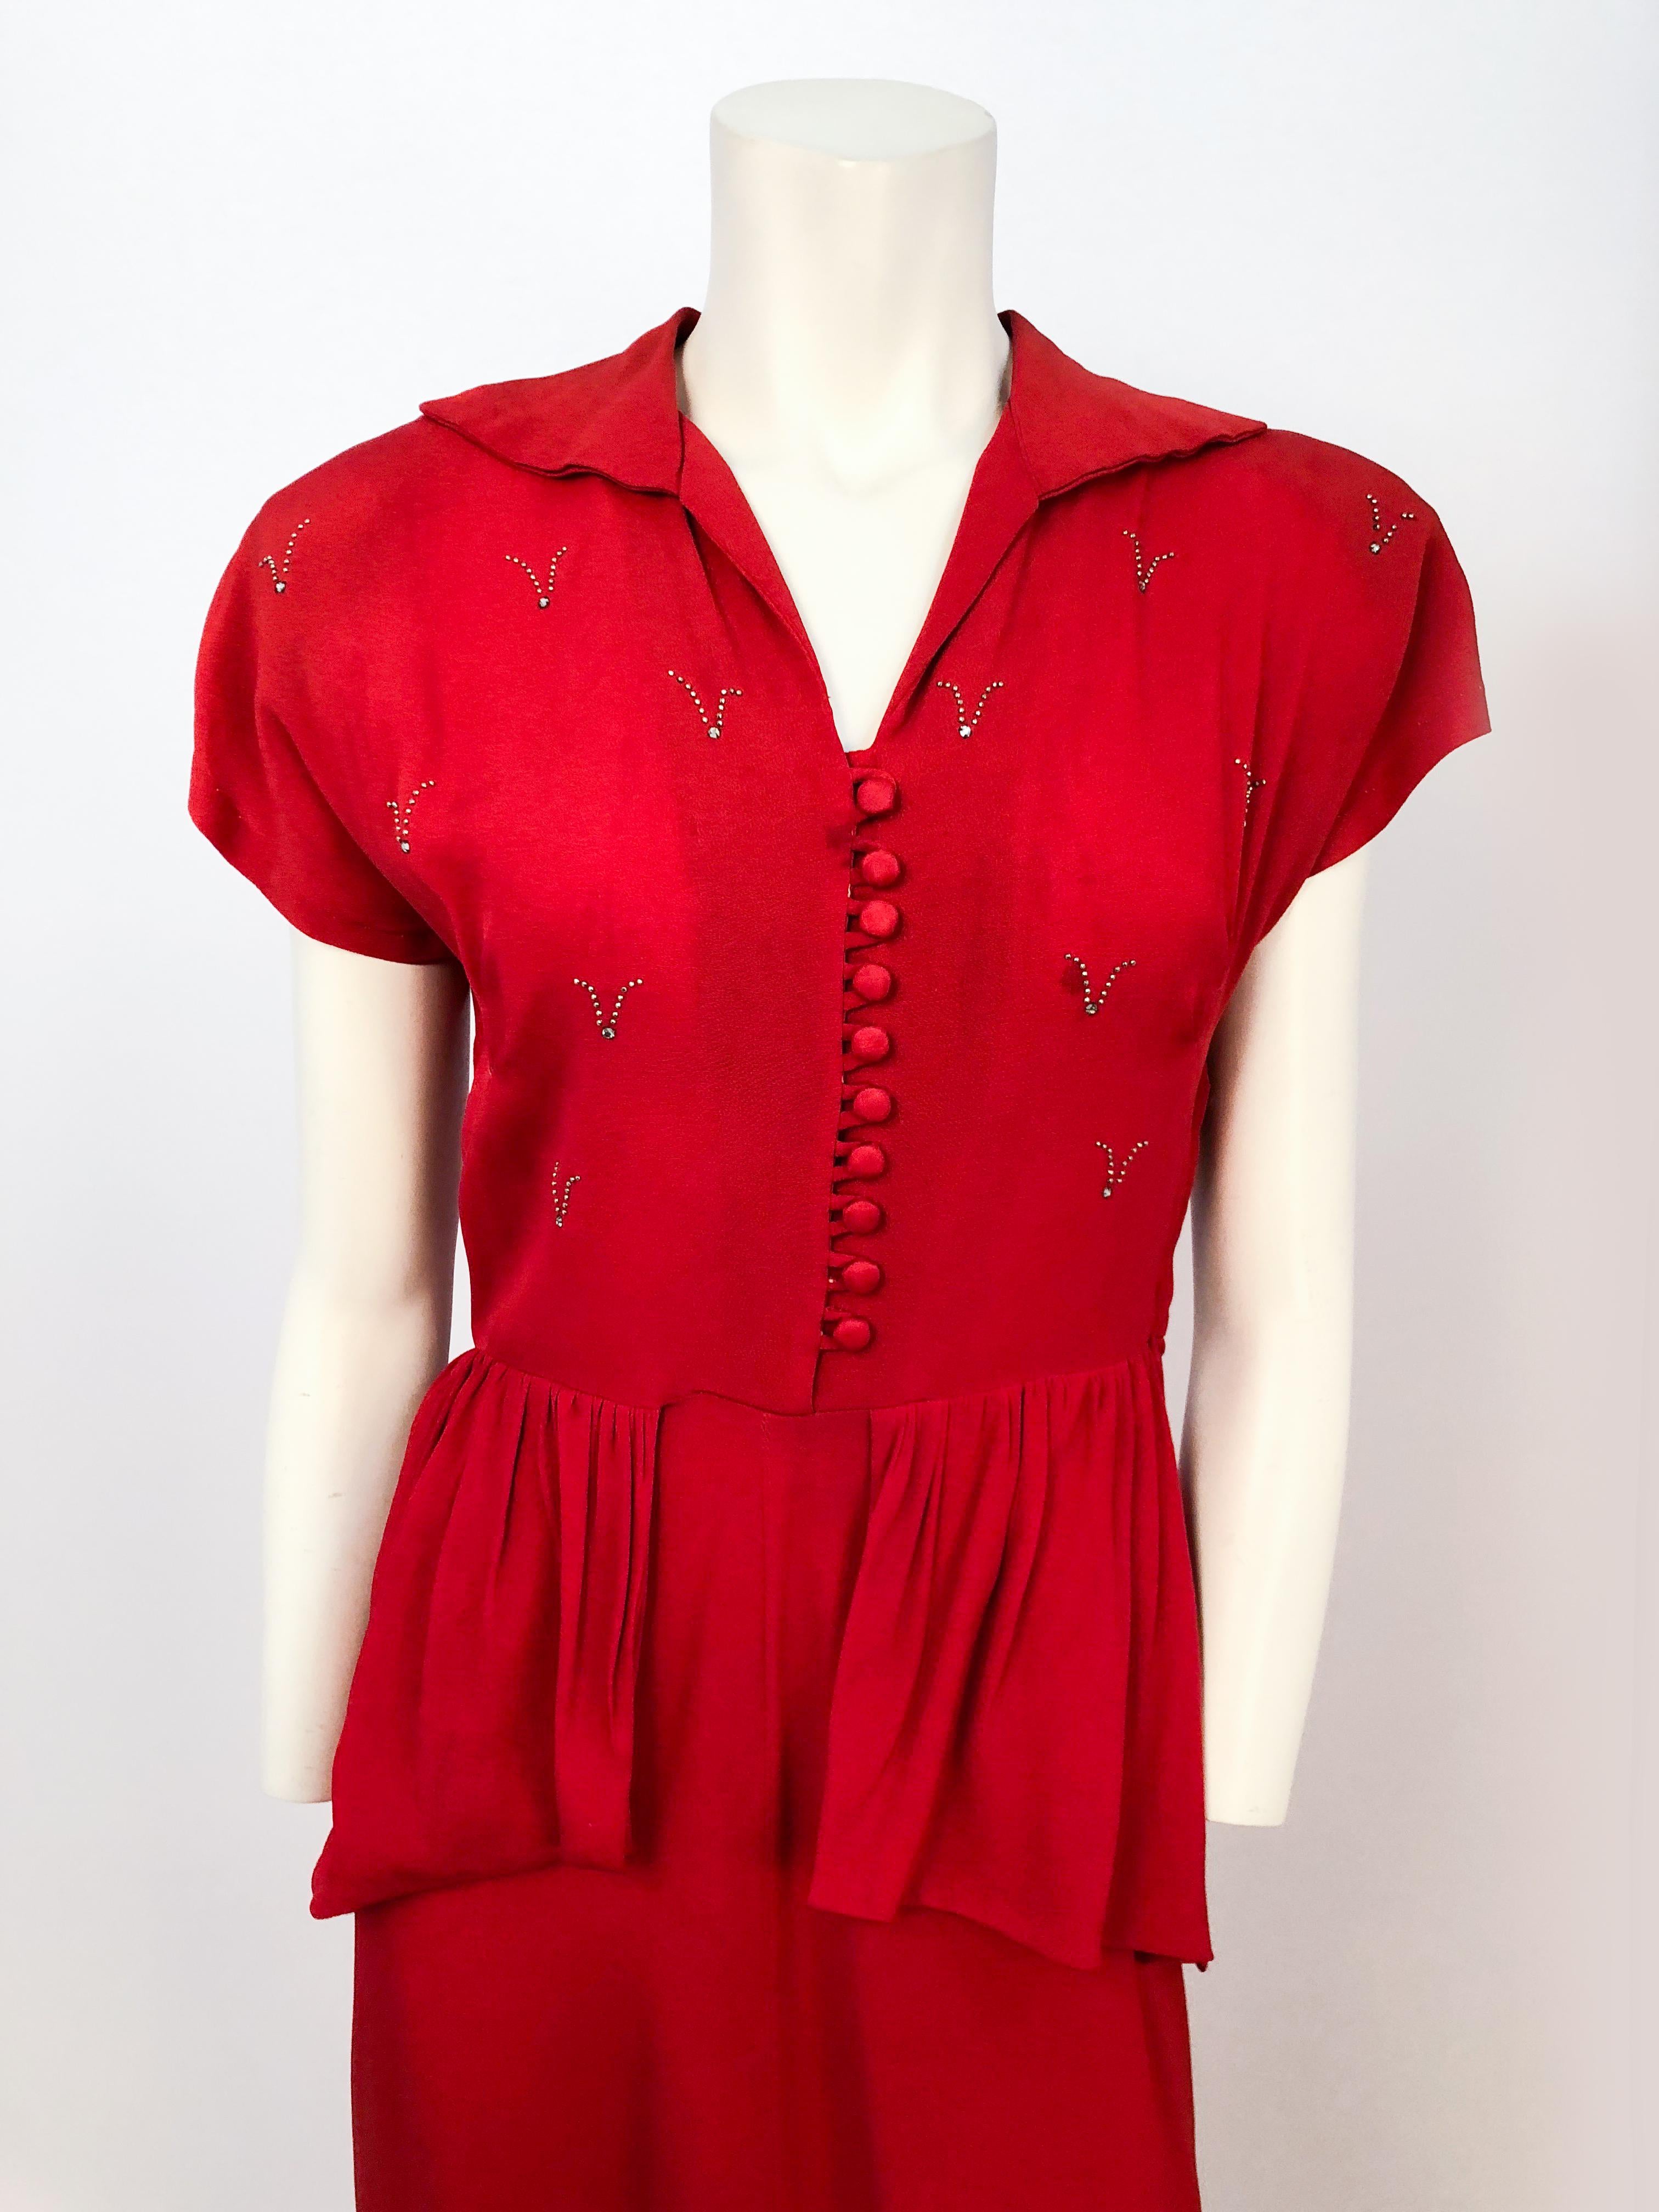 Women's 1940s Red Crepe Dress with Stud and Rhinestone Accents